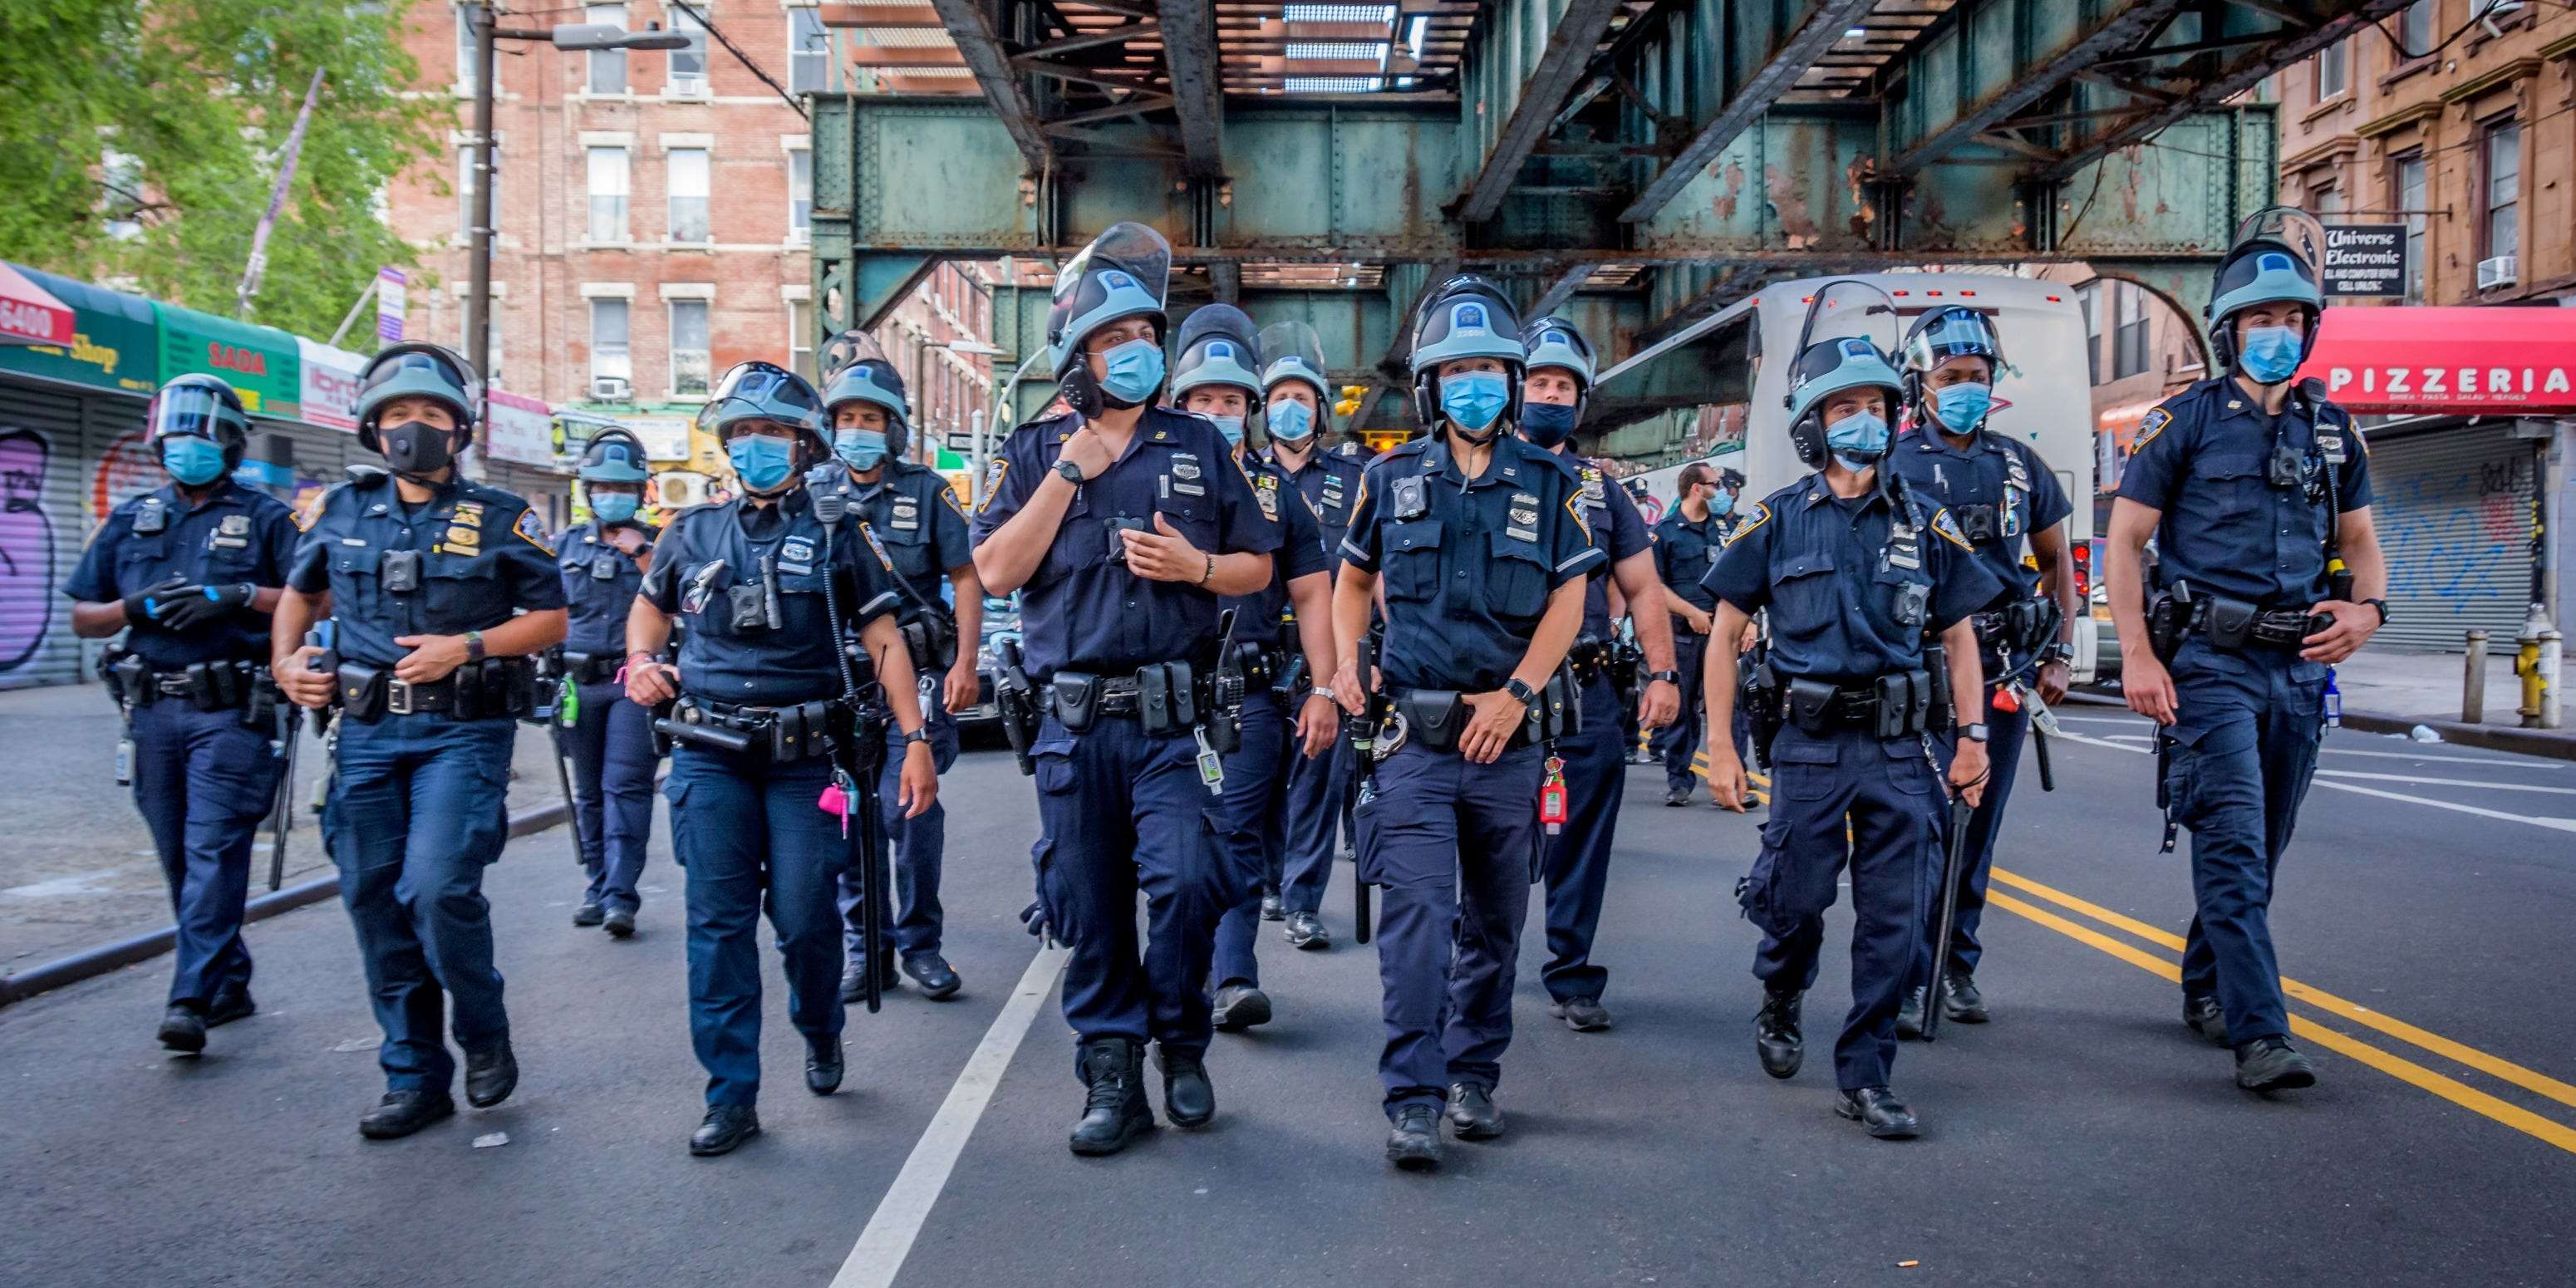 Nypd To Disband 600 Strong Plainclothes Anti Crimes Unit In A Move Toward Community Focused 